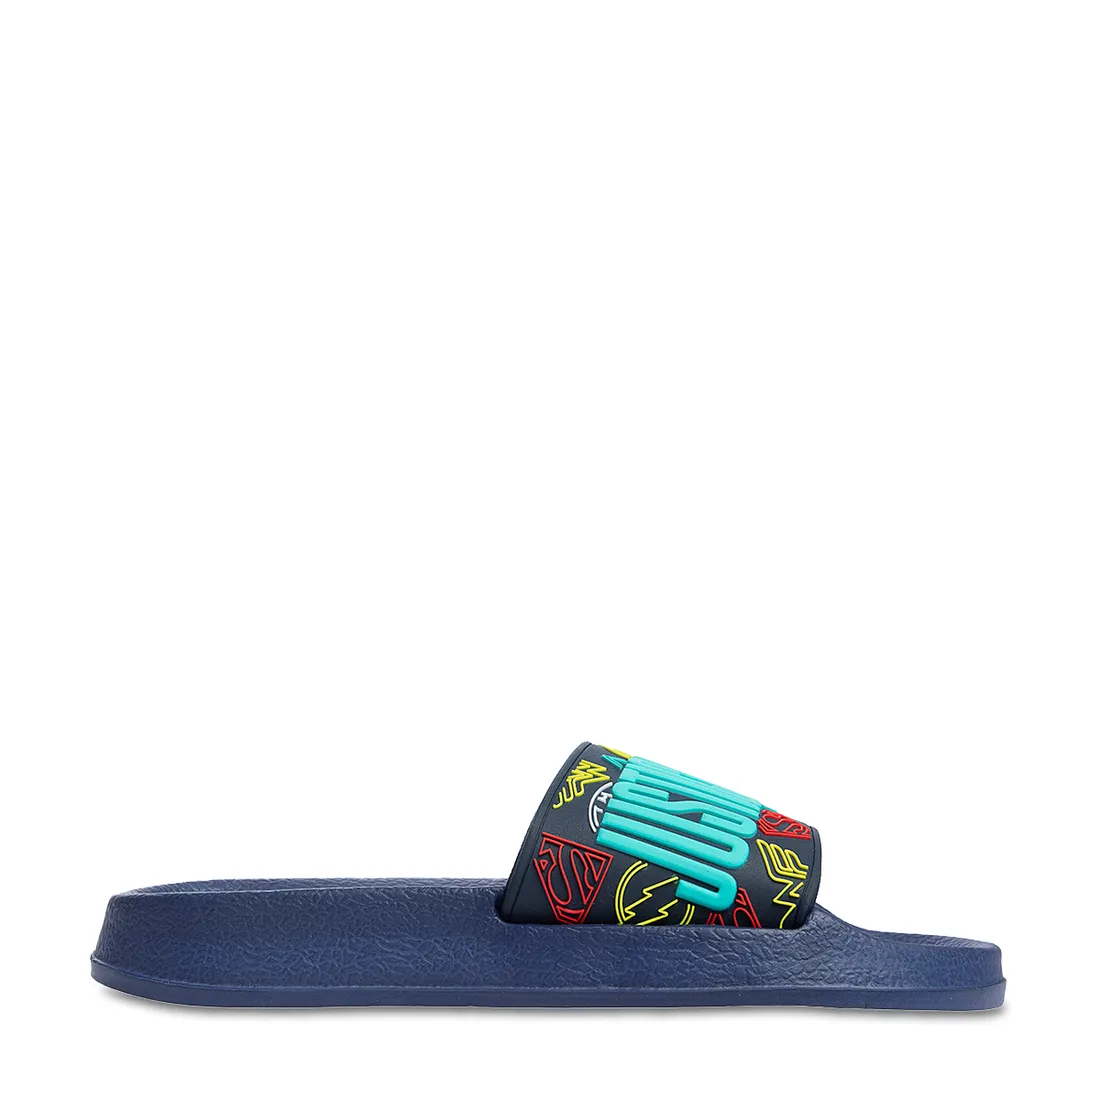 Justice League pool slide navy - BOYS 2-8 YEARS Shoes | Ackermans